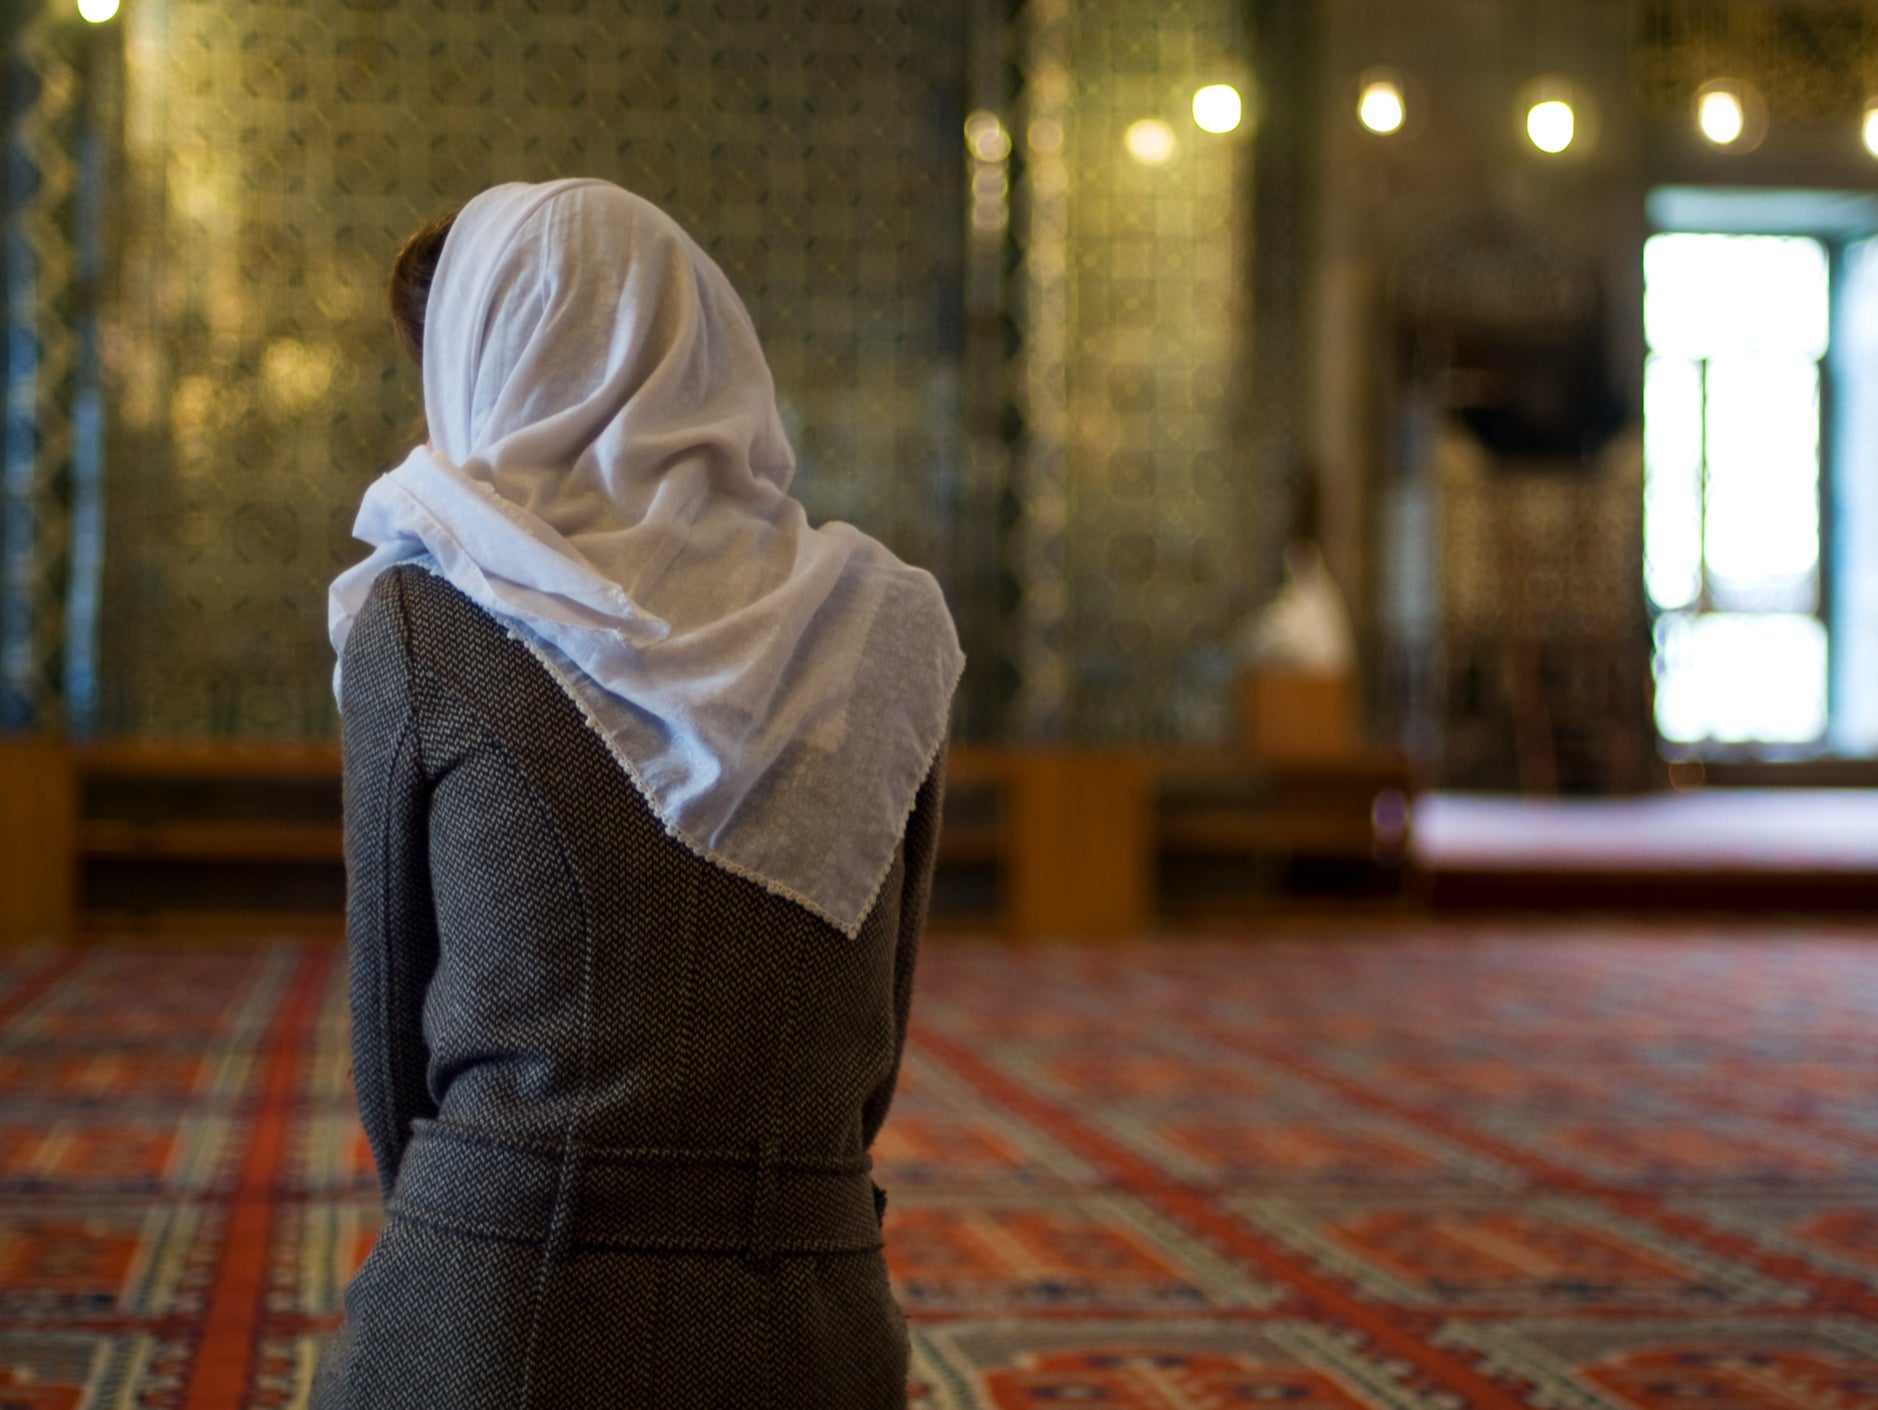 Girls adjust their headscarves before an Islamic prayer service for News  Photo - Getty Images